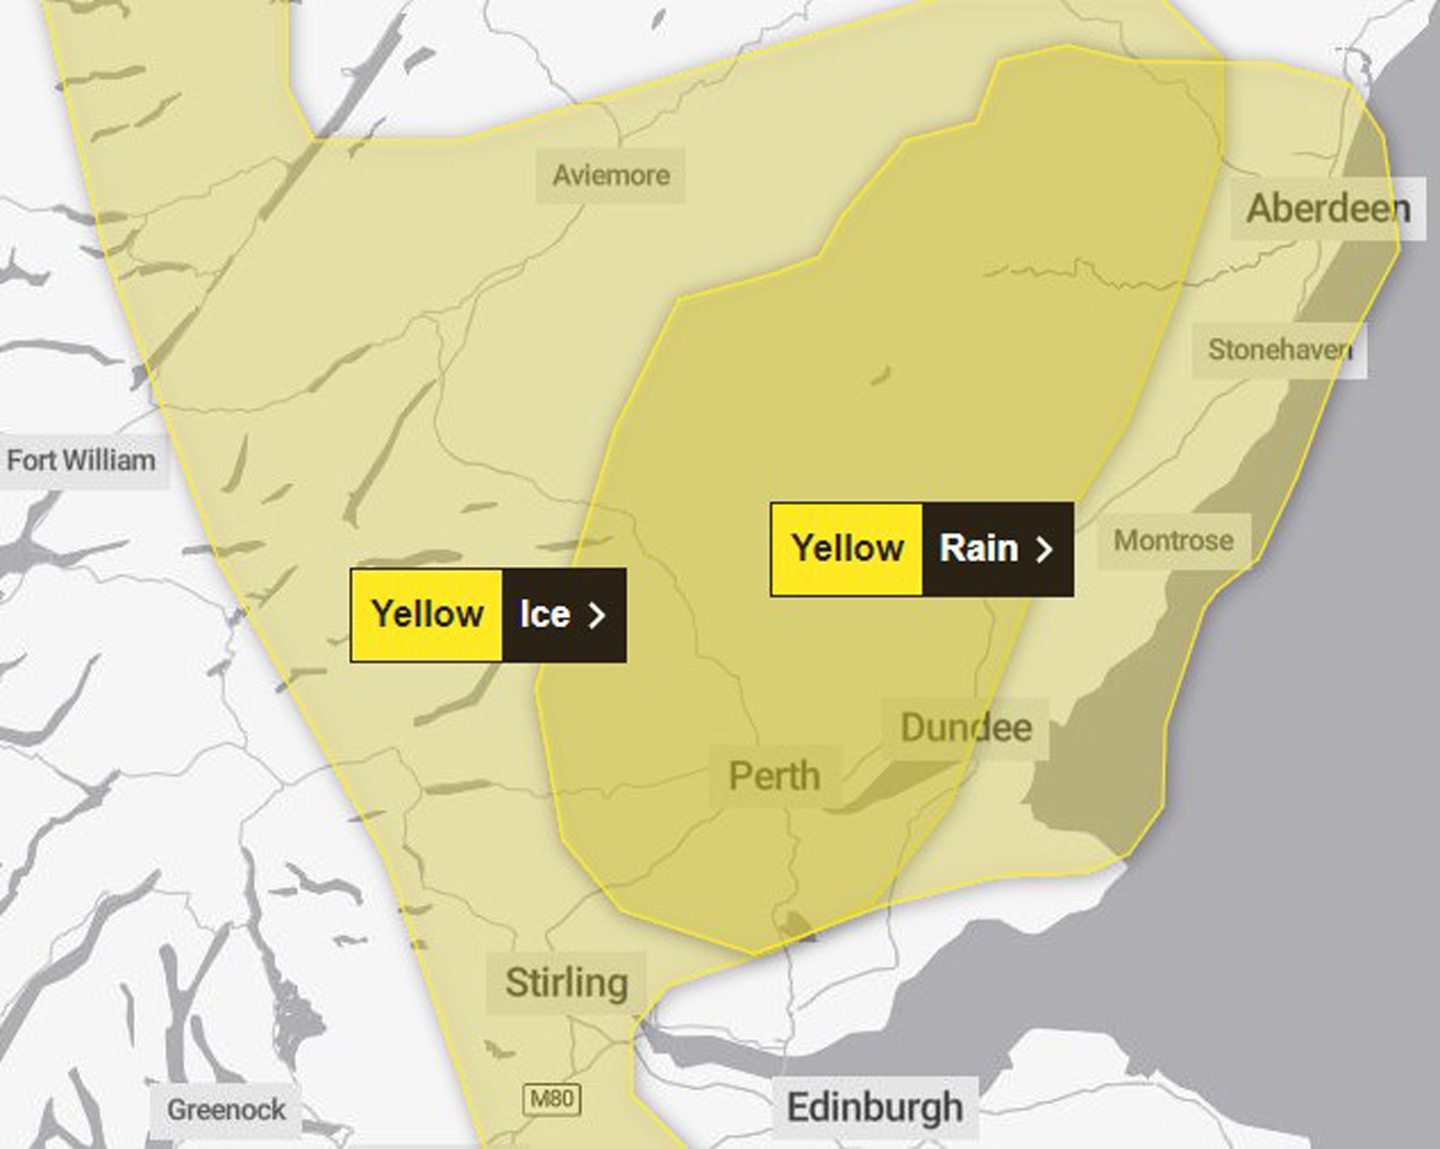 The area covered by the Met Office's yellow alerts for ice and rain.